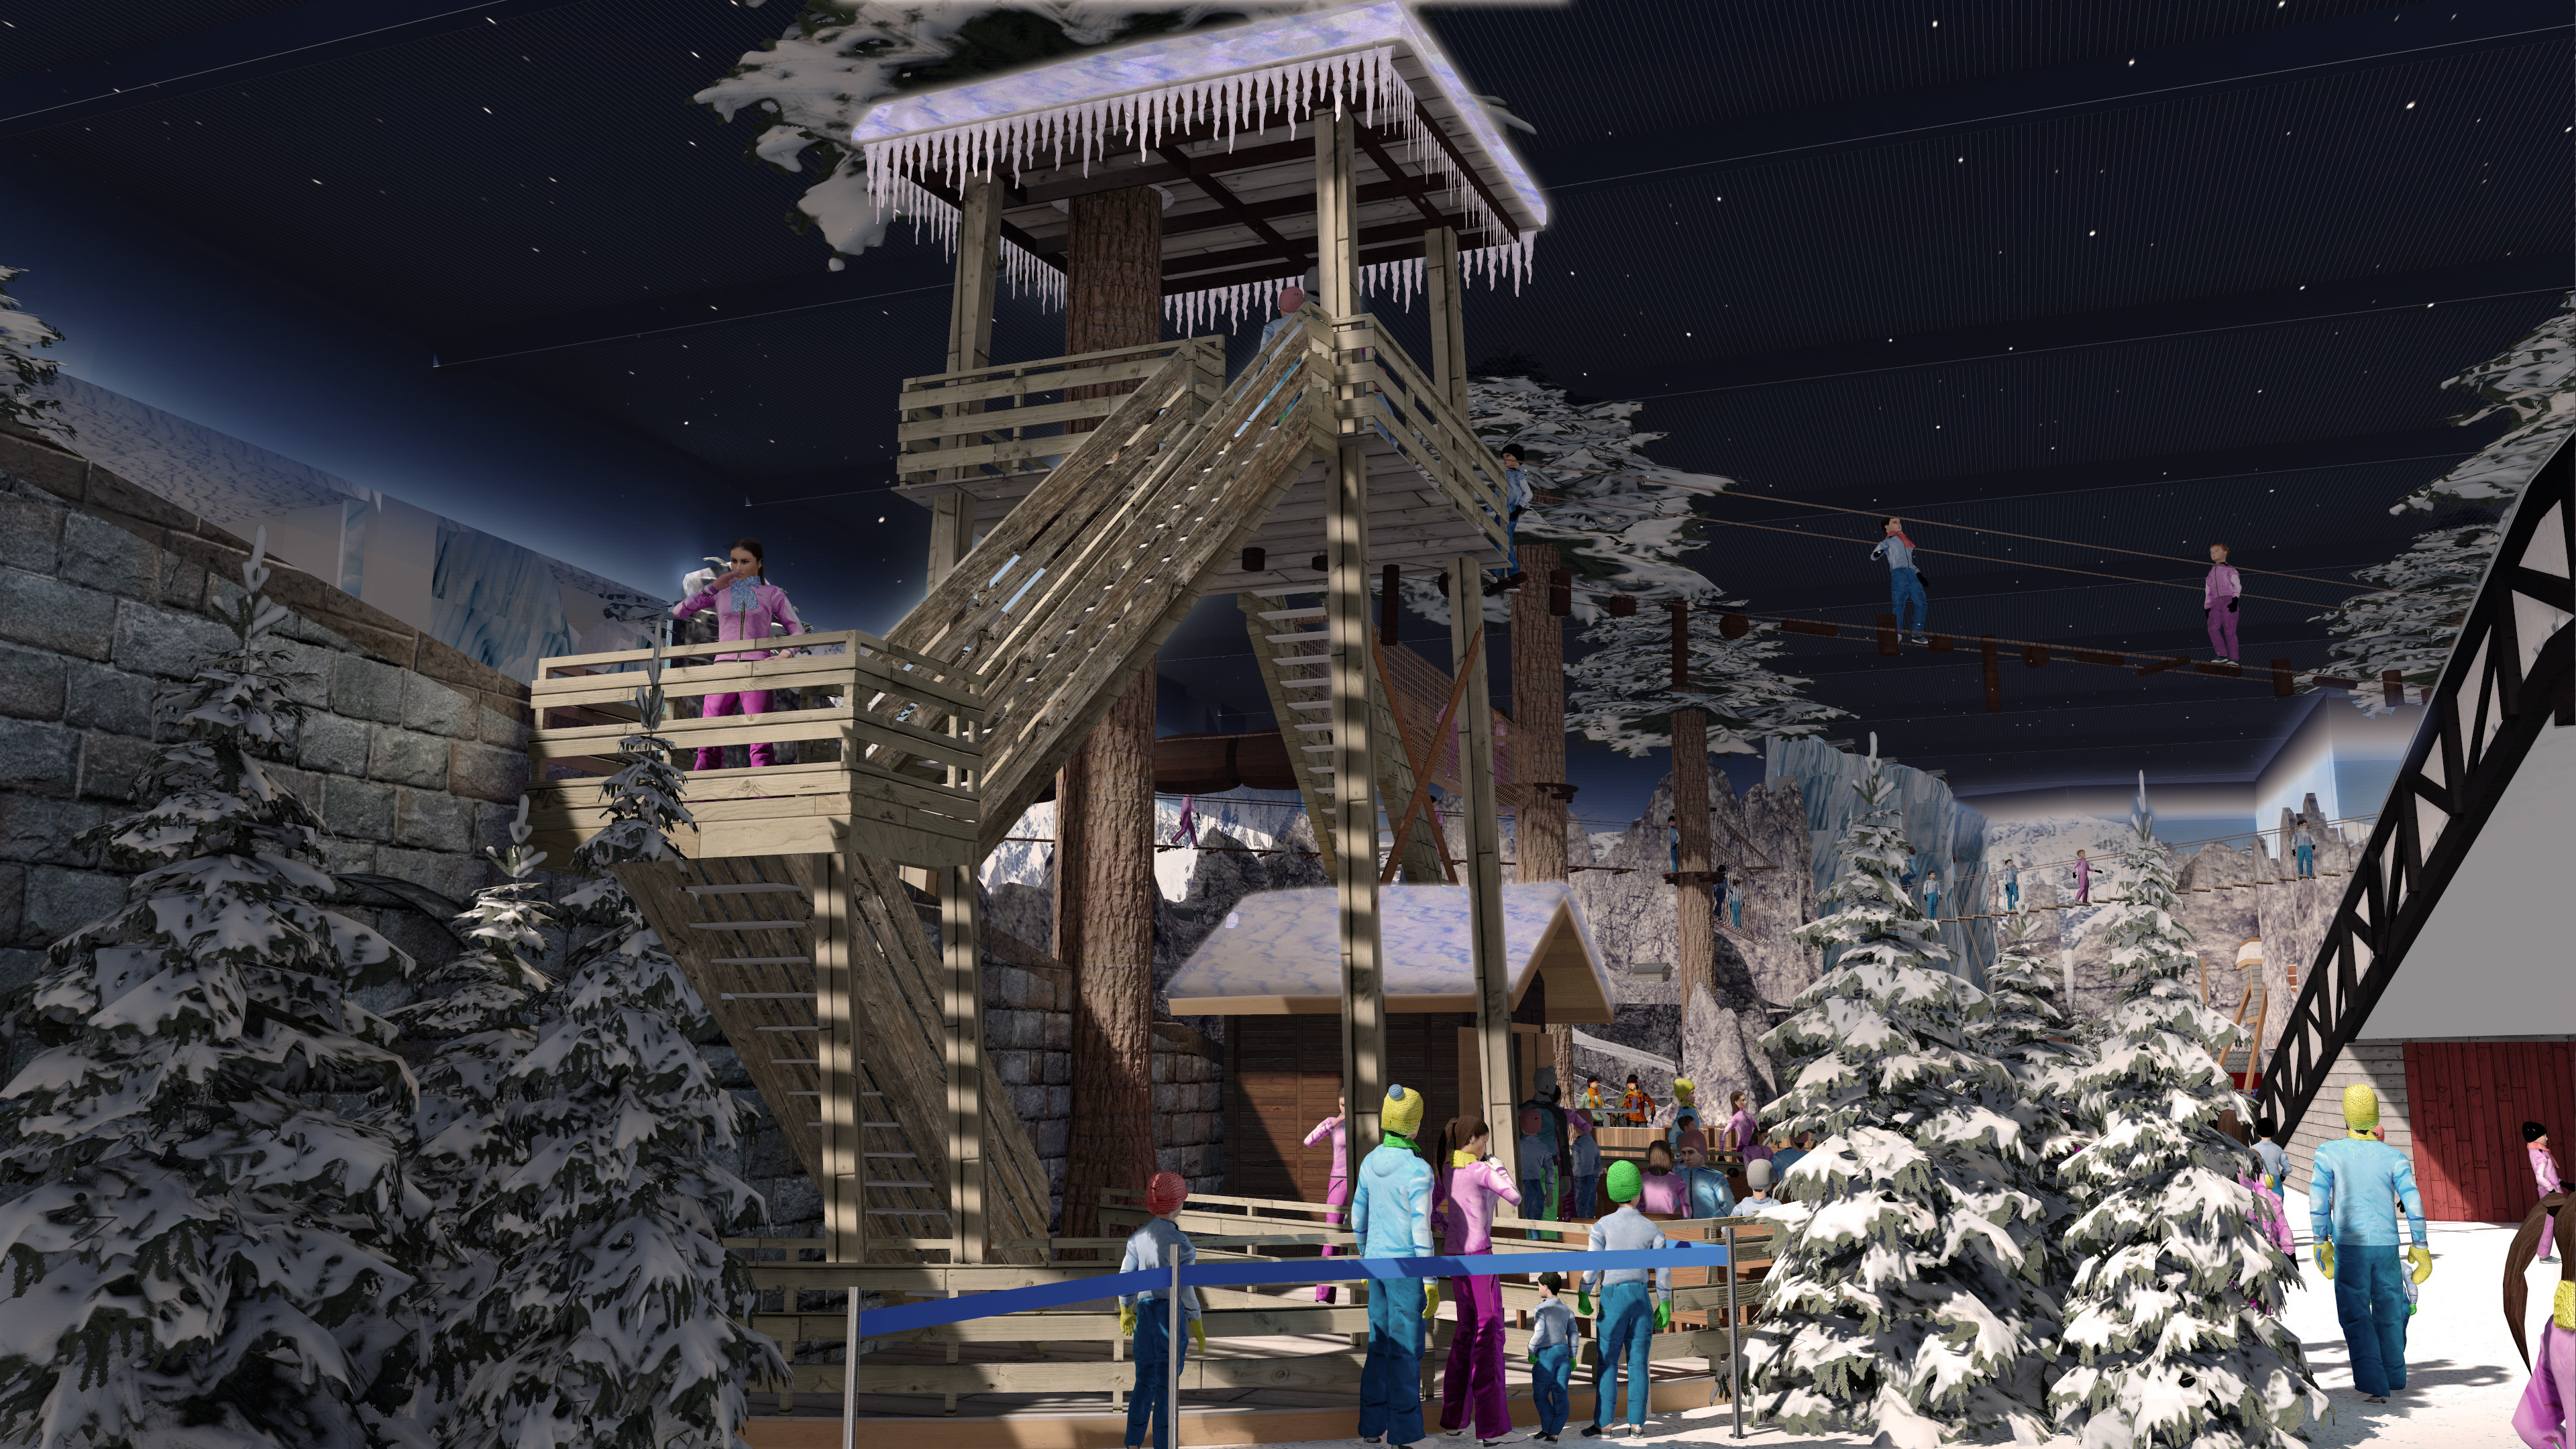 Indoor snow themepark - Snowplay Hight Ropes Course Tower